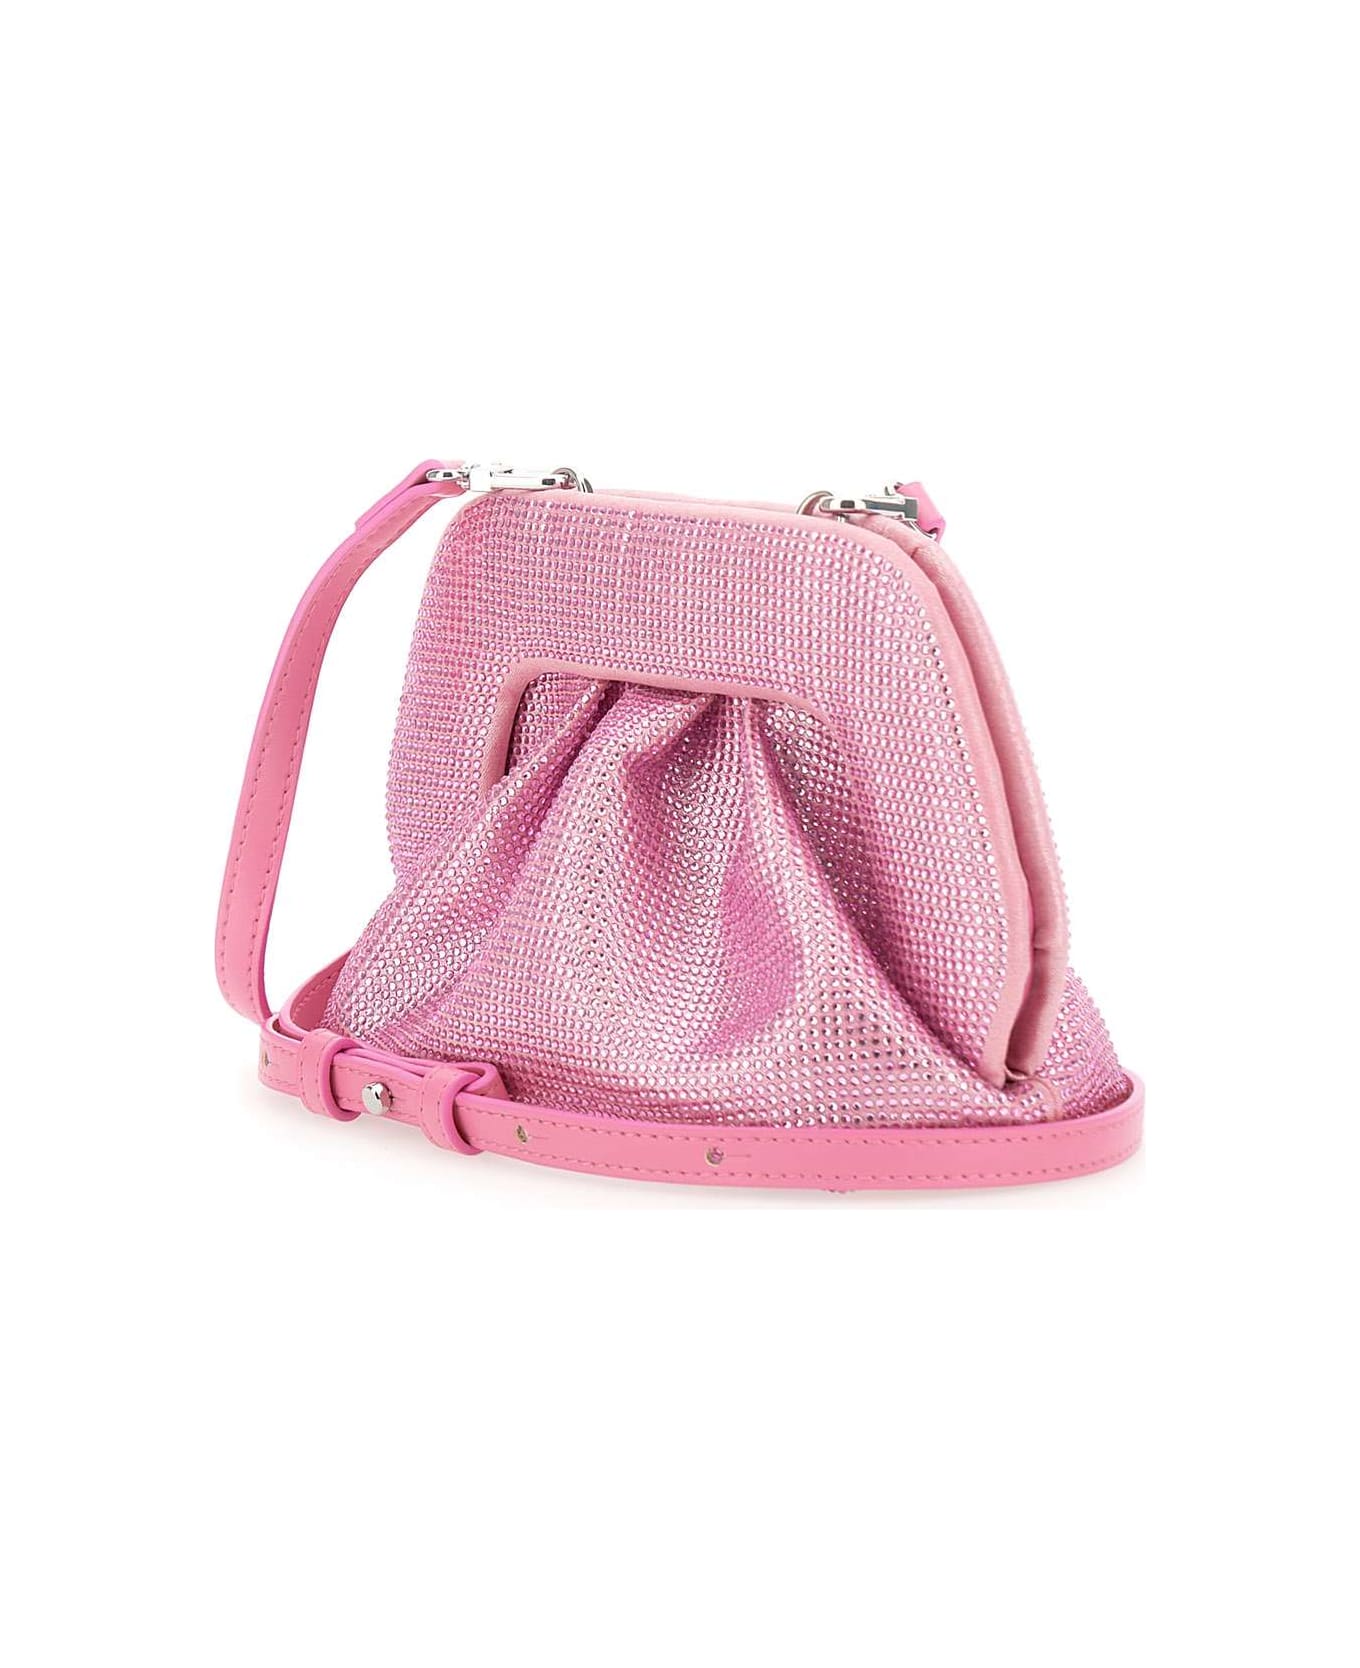 THEMOIRè "gea Strass" Vegan Leather Clutch Bag - PINK クラッチバッグ